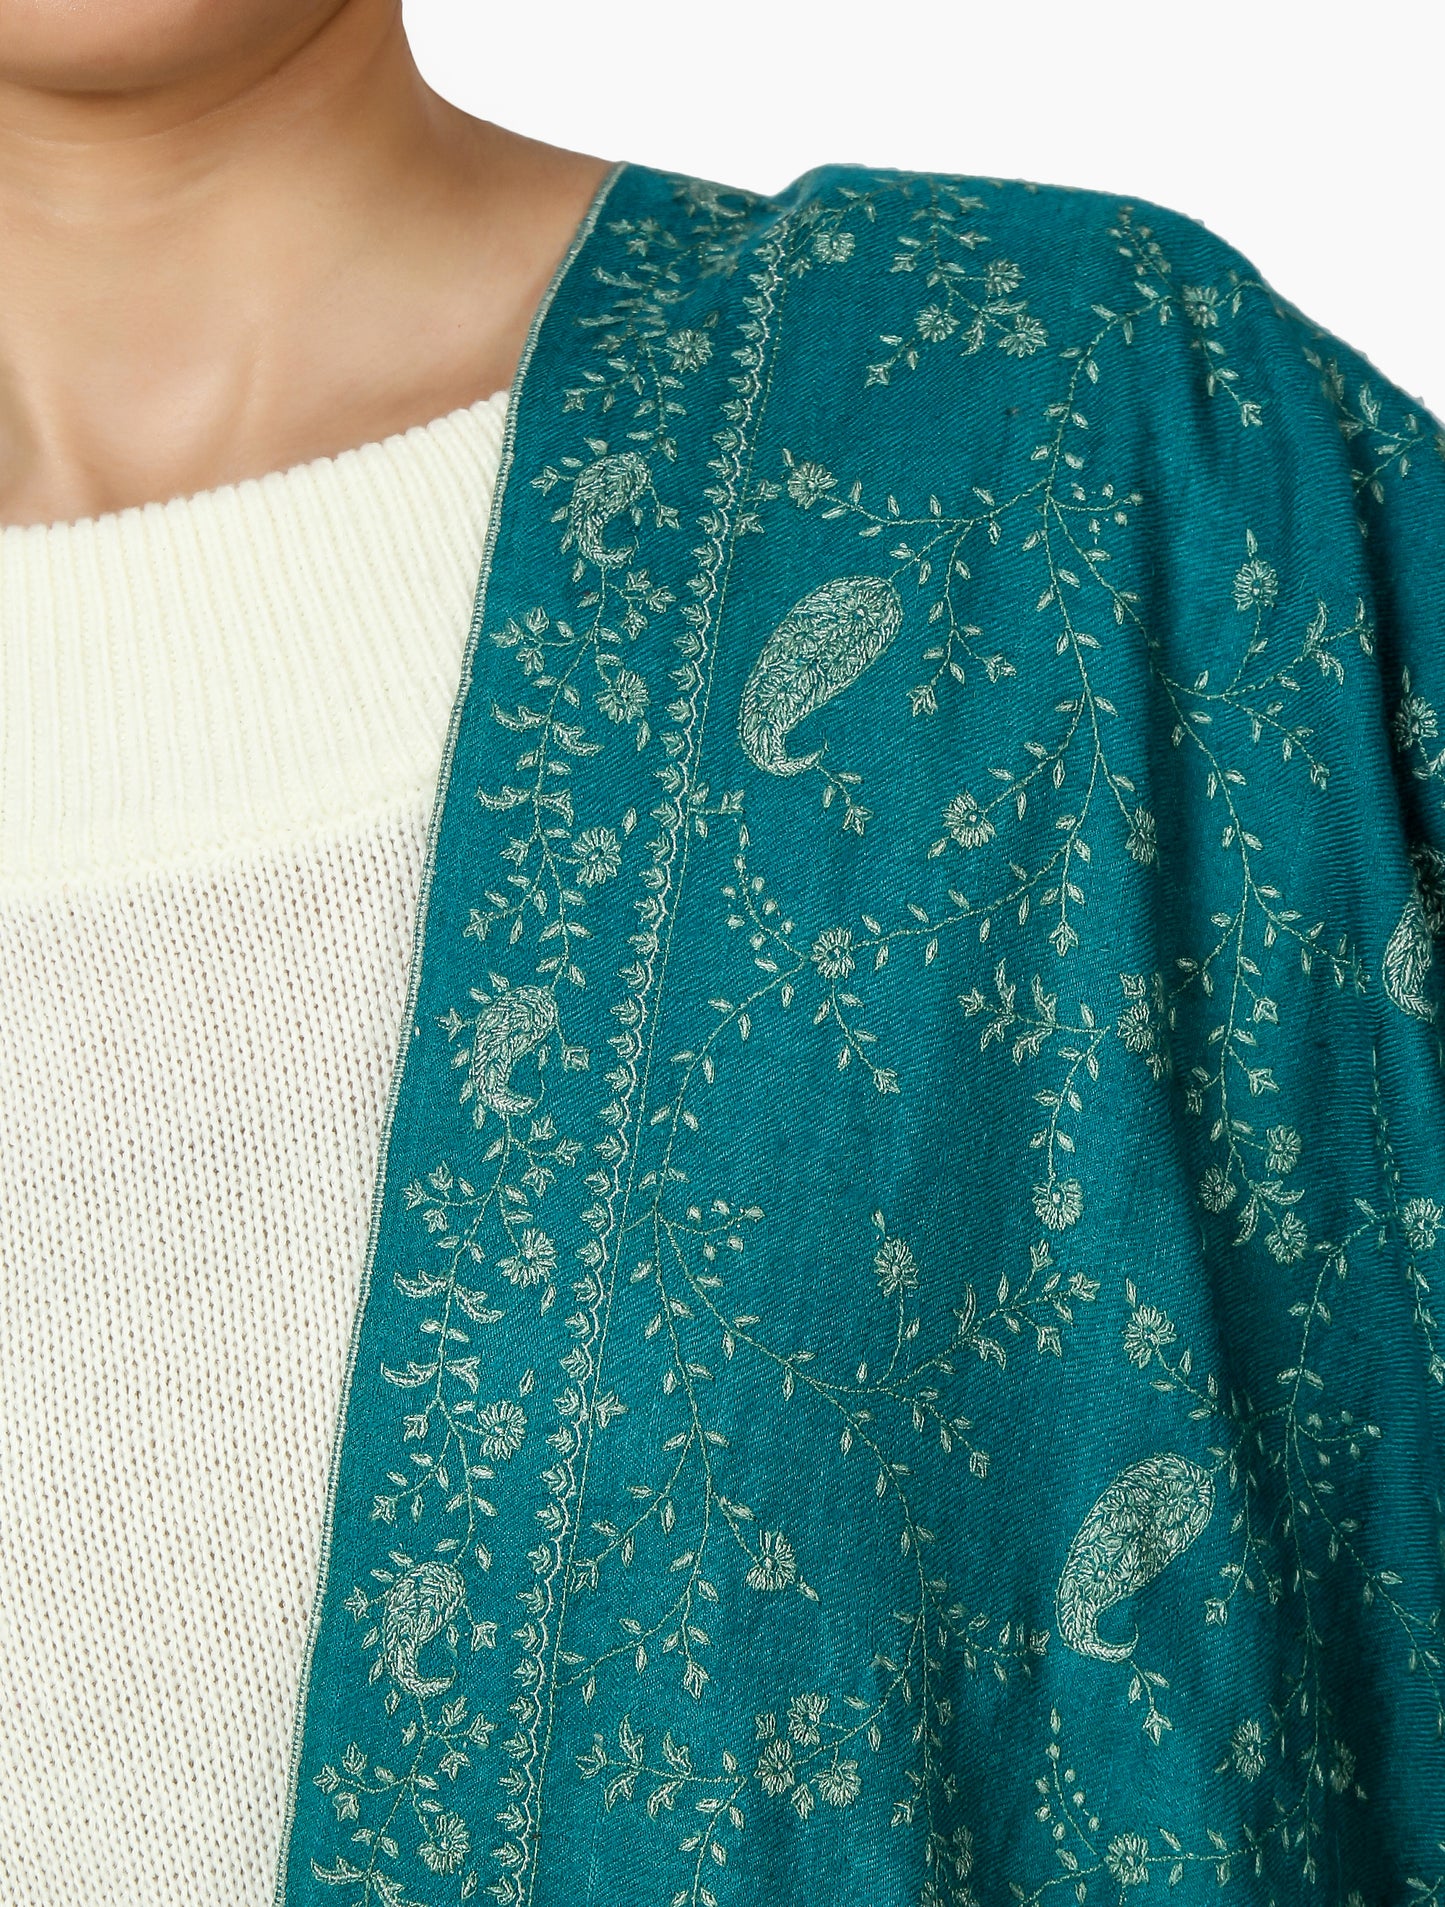 Cashmere Pashmina Shawl Embroidered (Forest Green)